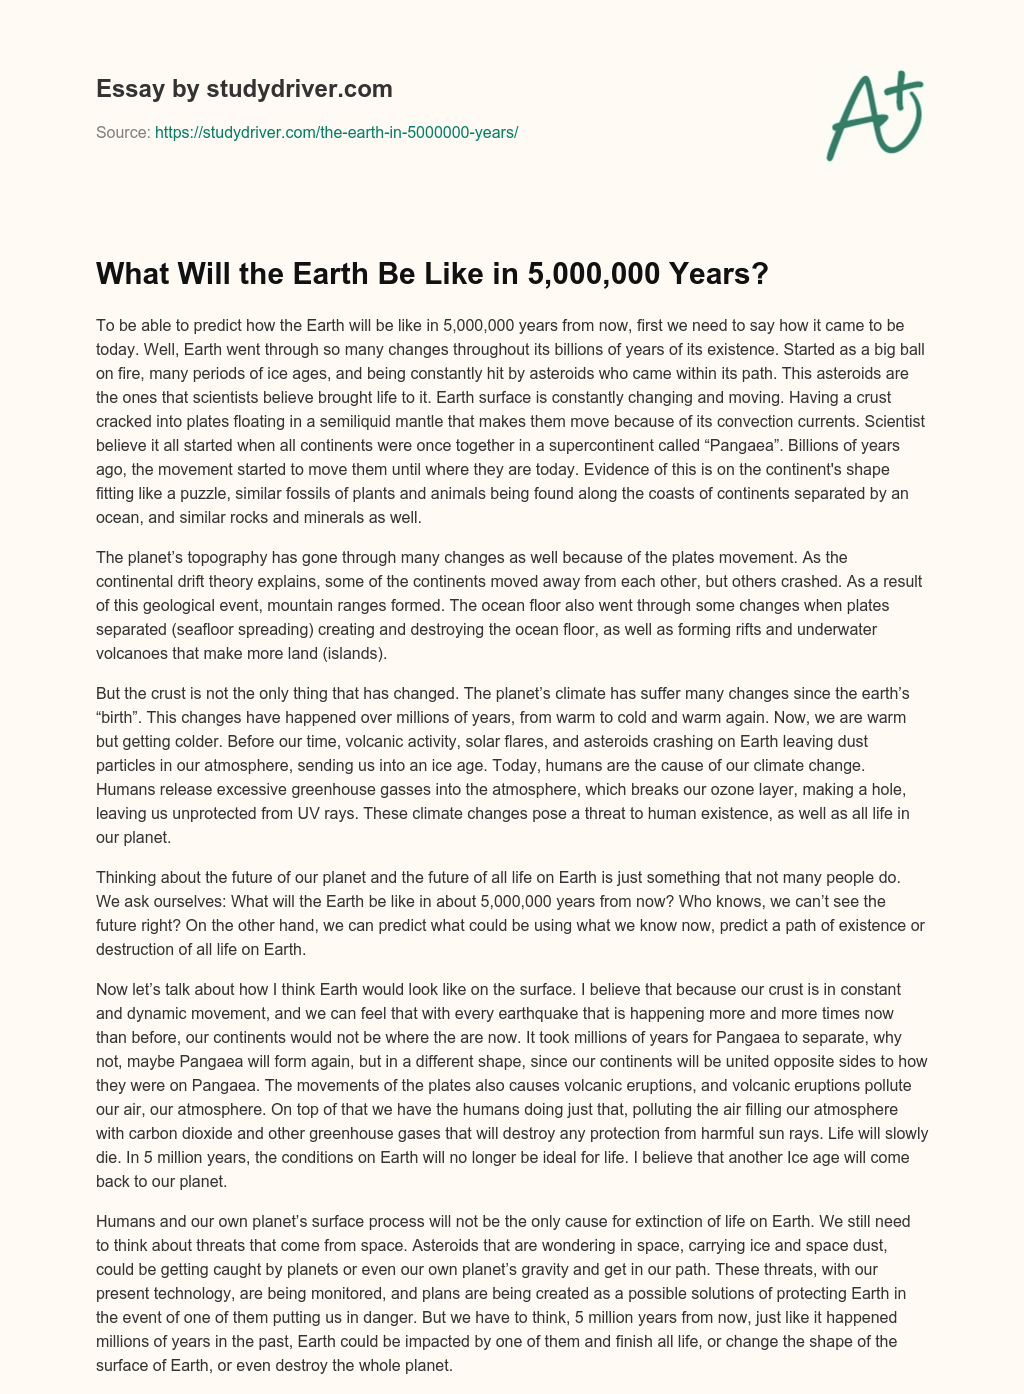 What Will the Earth be Like in 5,000,000 Years? essay